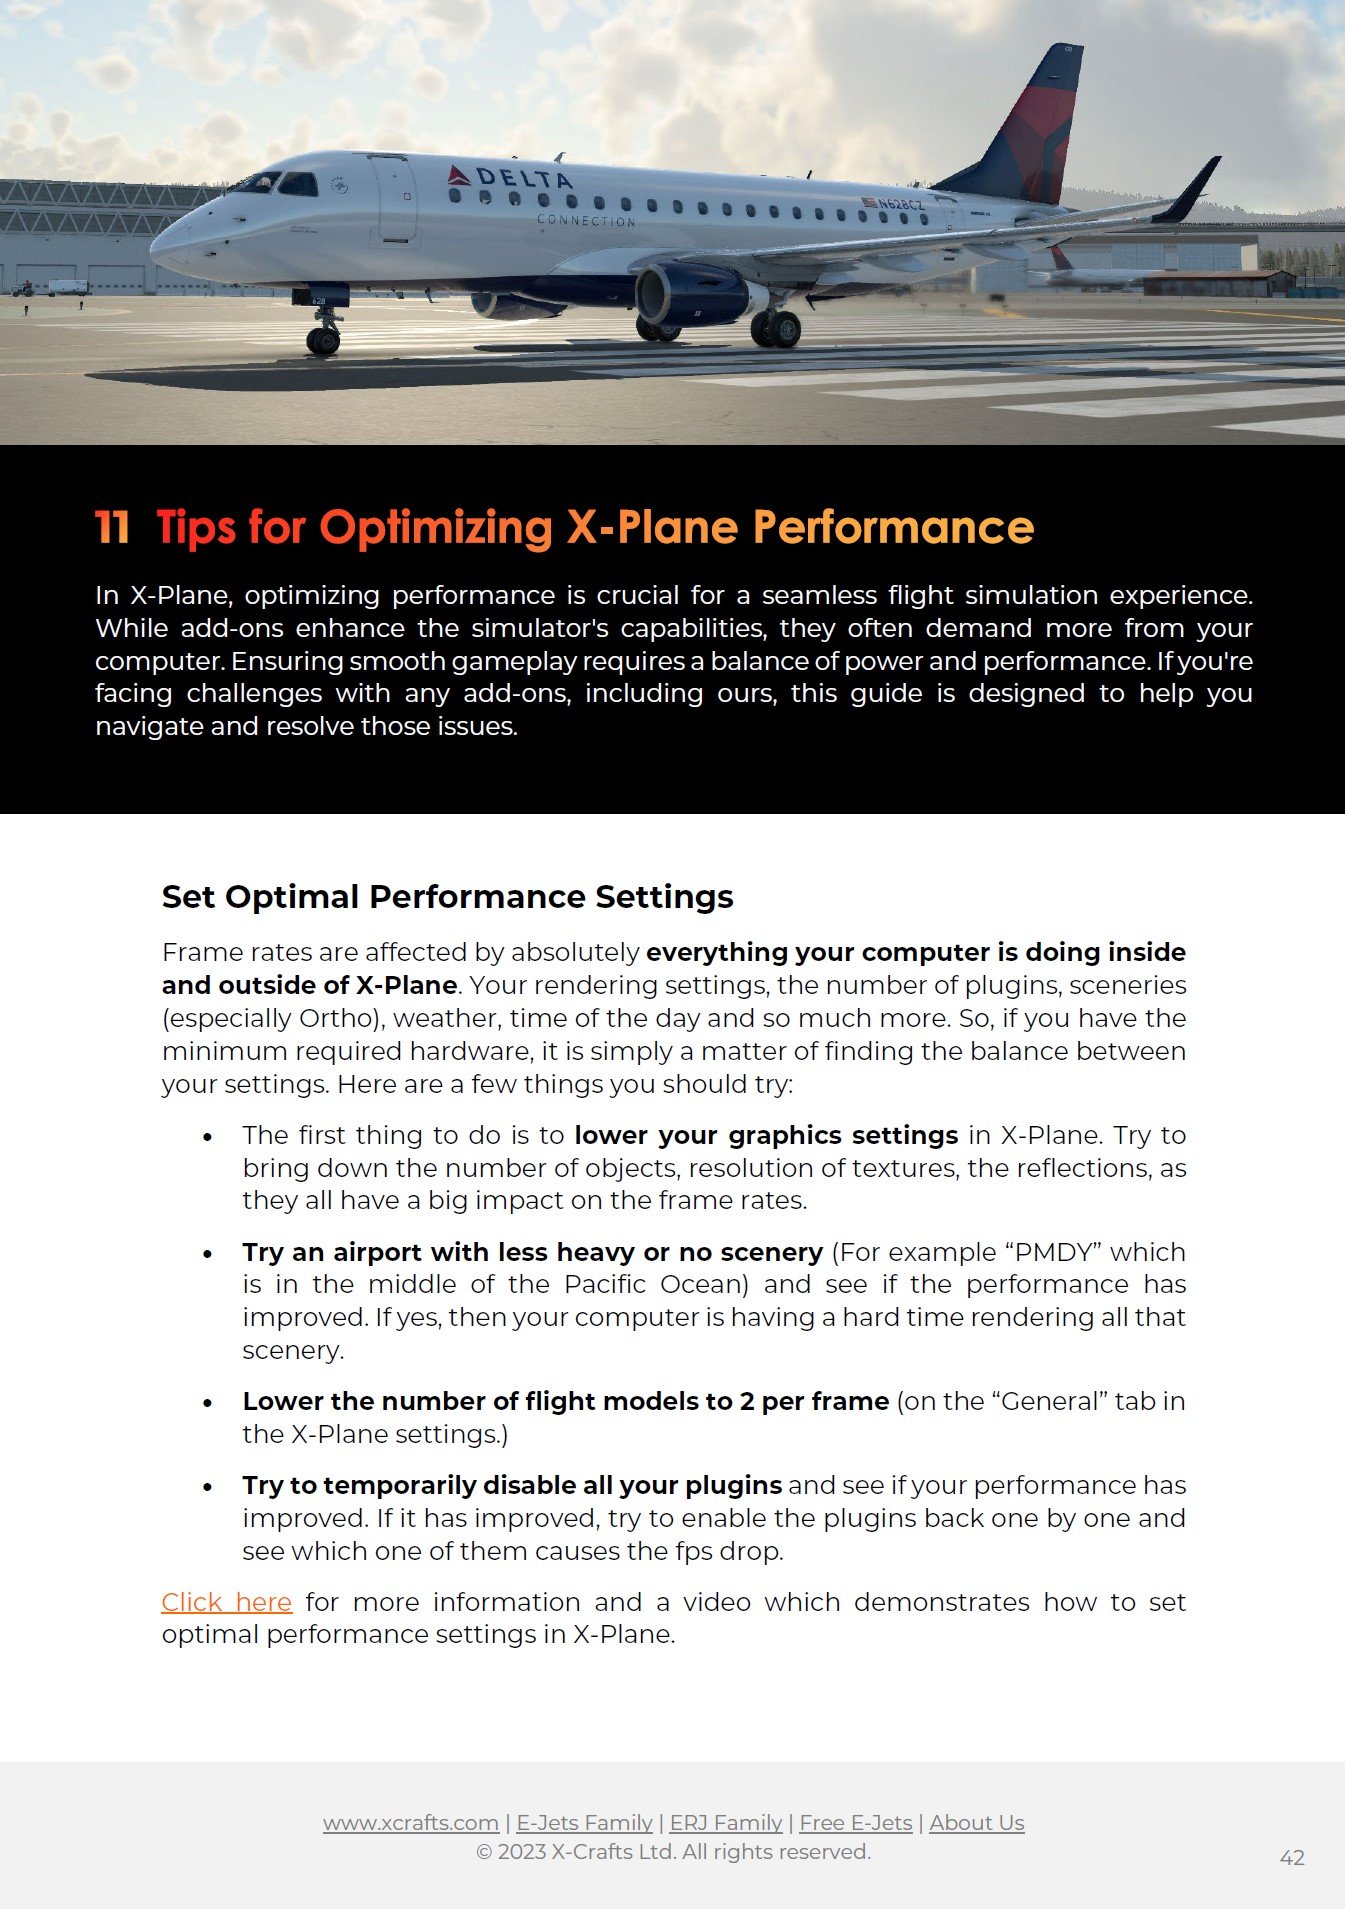 X-Plane-Explained-Your-Free-Handbook-to-Learn-X-Plane-the-Easy-Way_optimization_frame_rates_performance_Guide.jpg